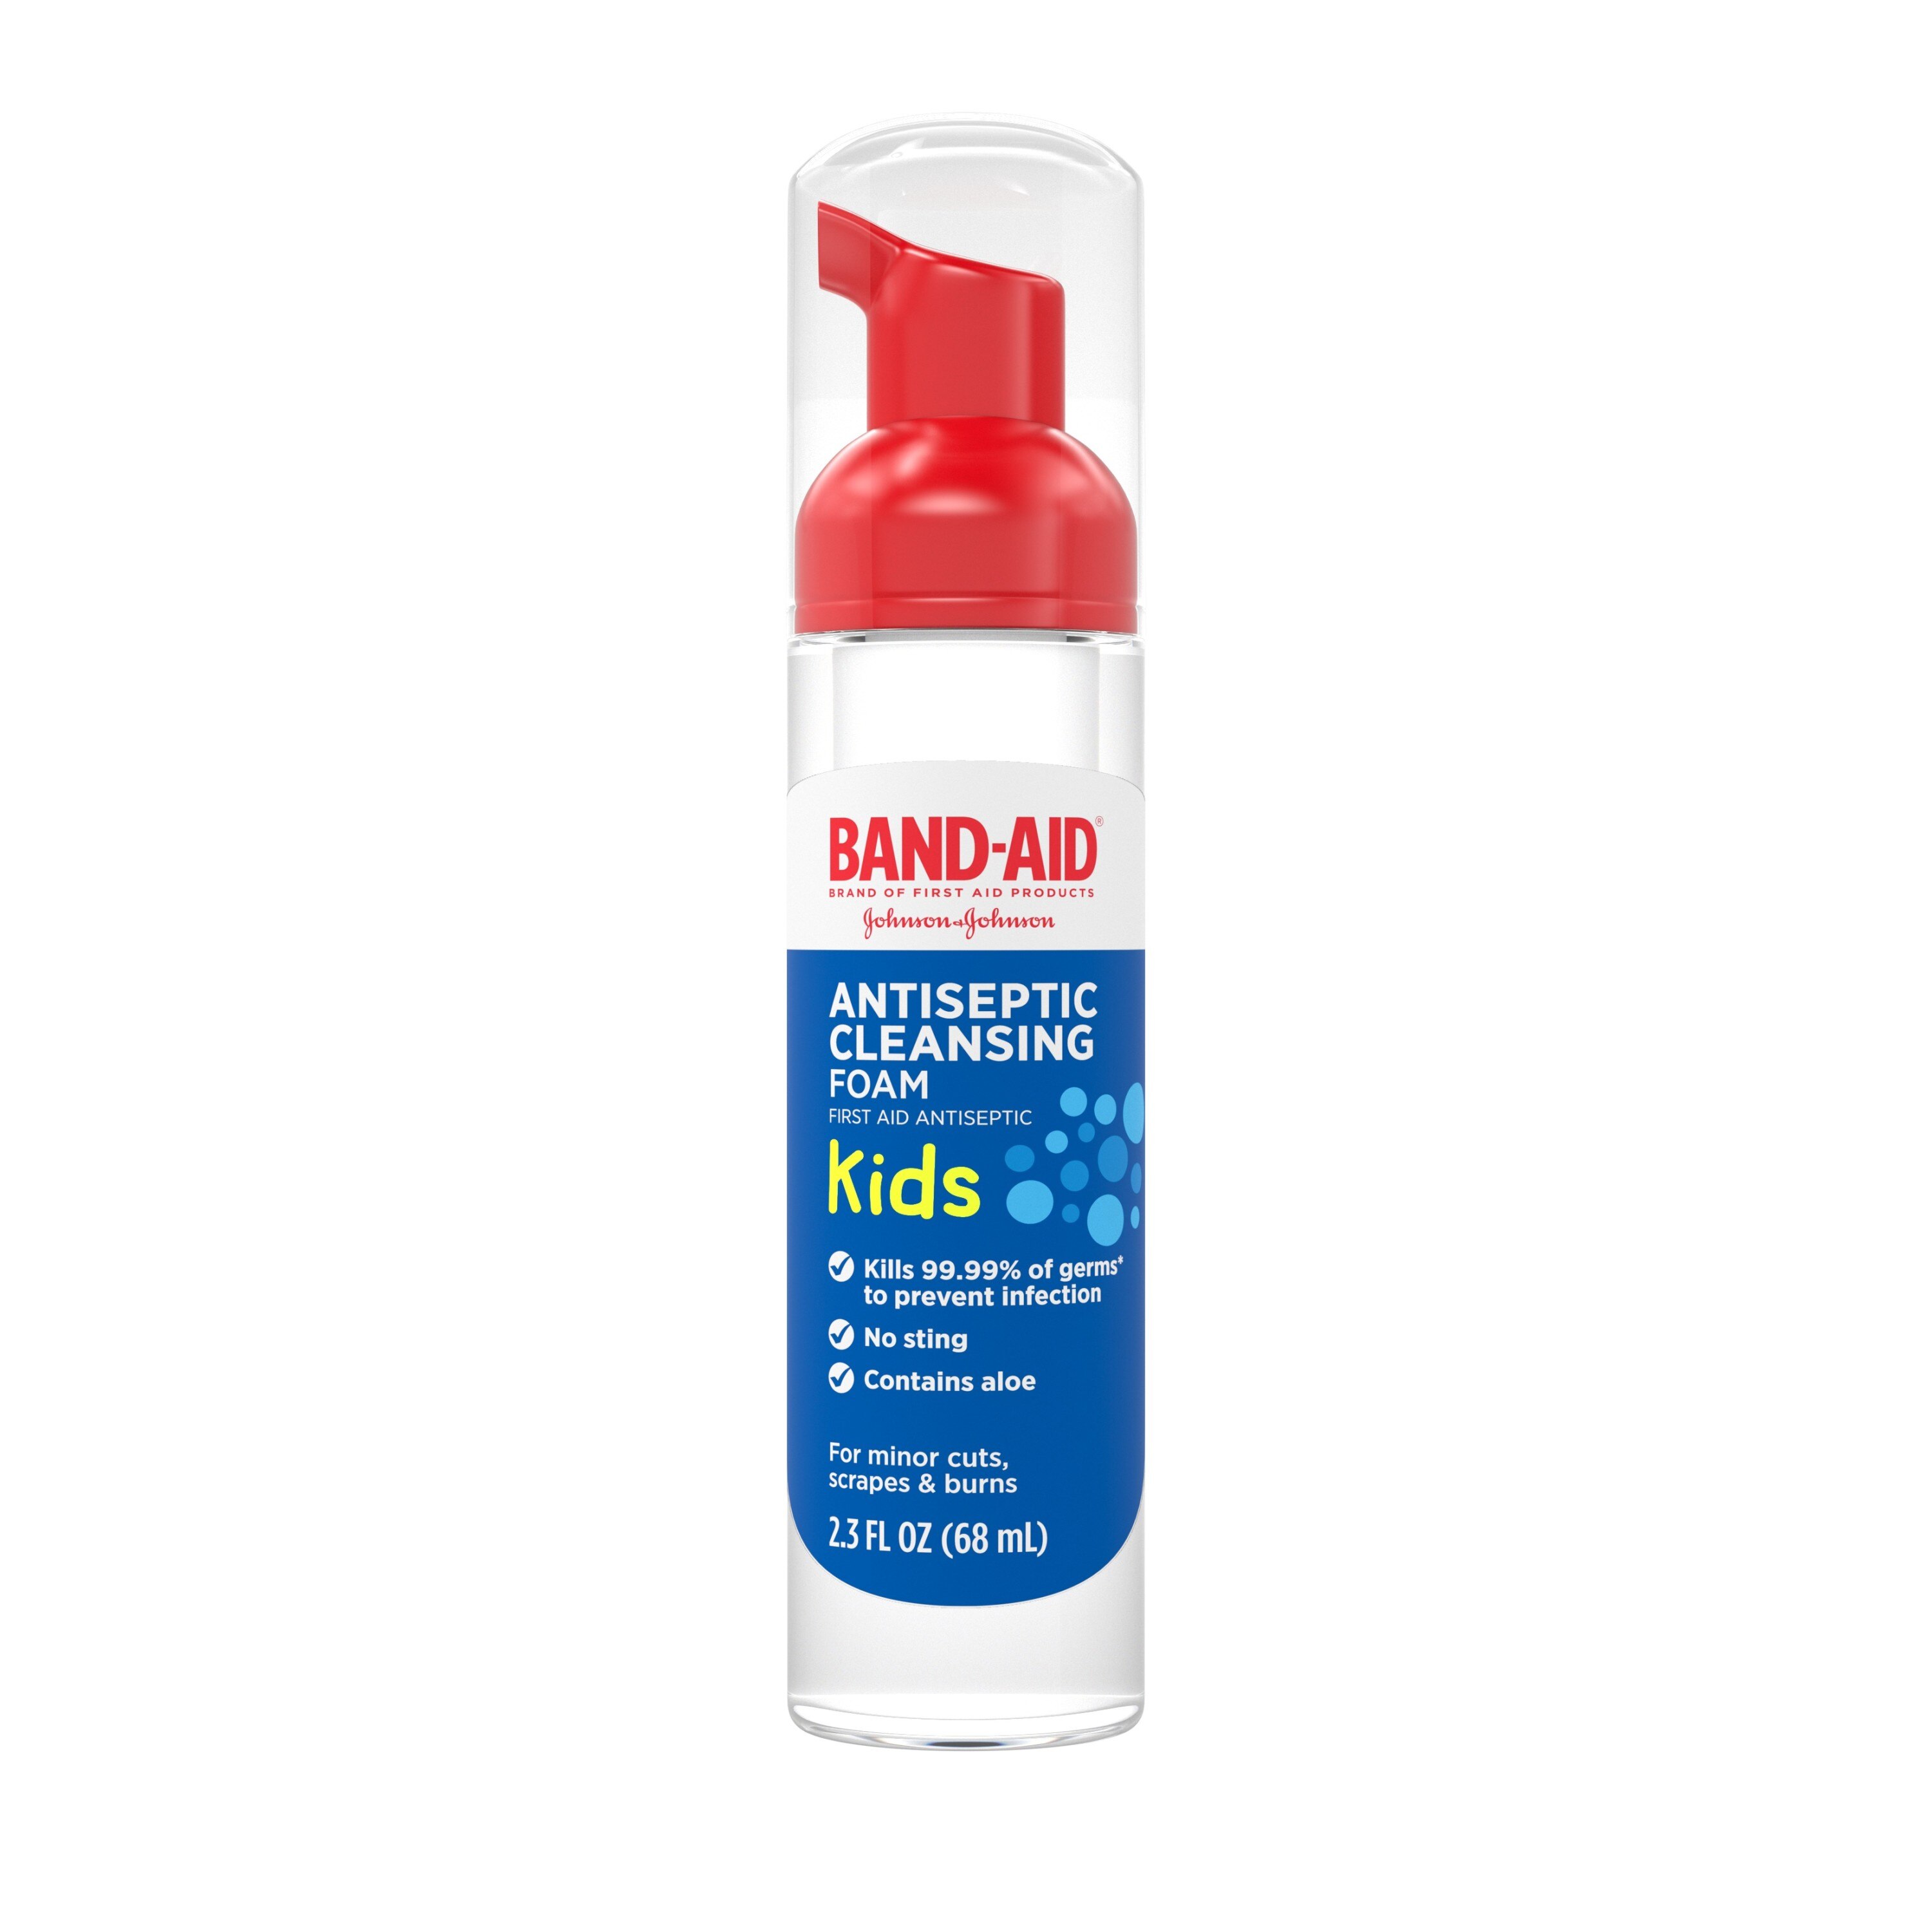 Band-Aid First Aid Antiseptic Cleansing Foam for Kids, 2.3 fl. Oz